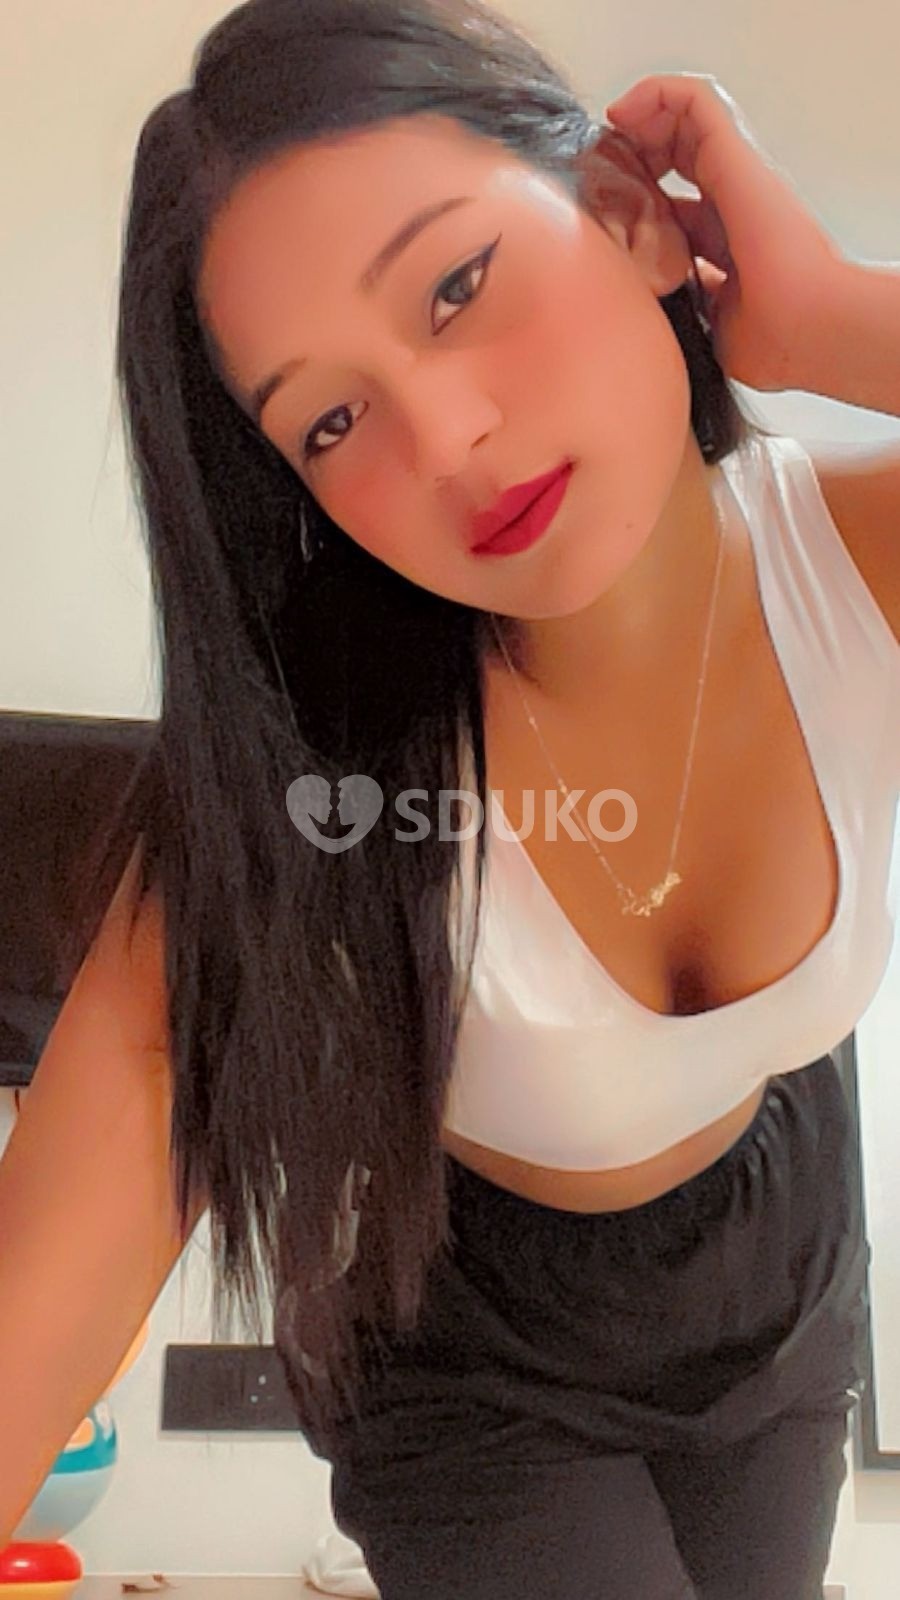 Kannur..low price 🌟Myself Kavya 📞24 hours ⭐💗service available   AFFORDABLE AND CHEAPEST CALL GIRL SERVICE